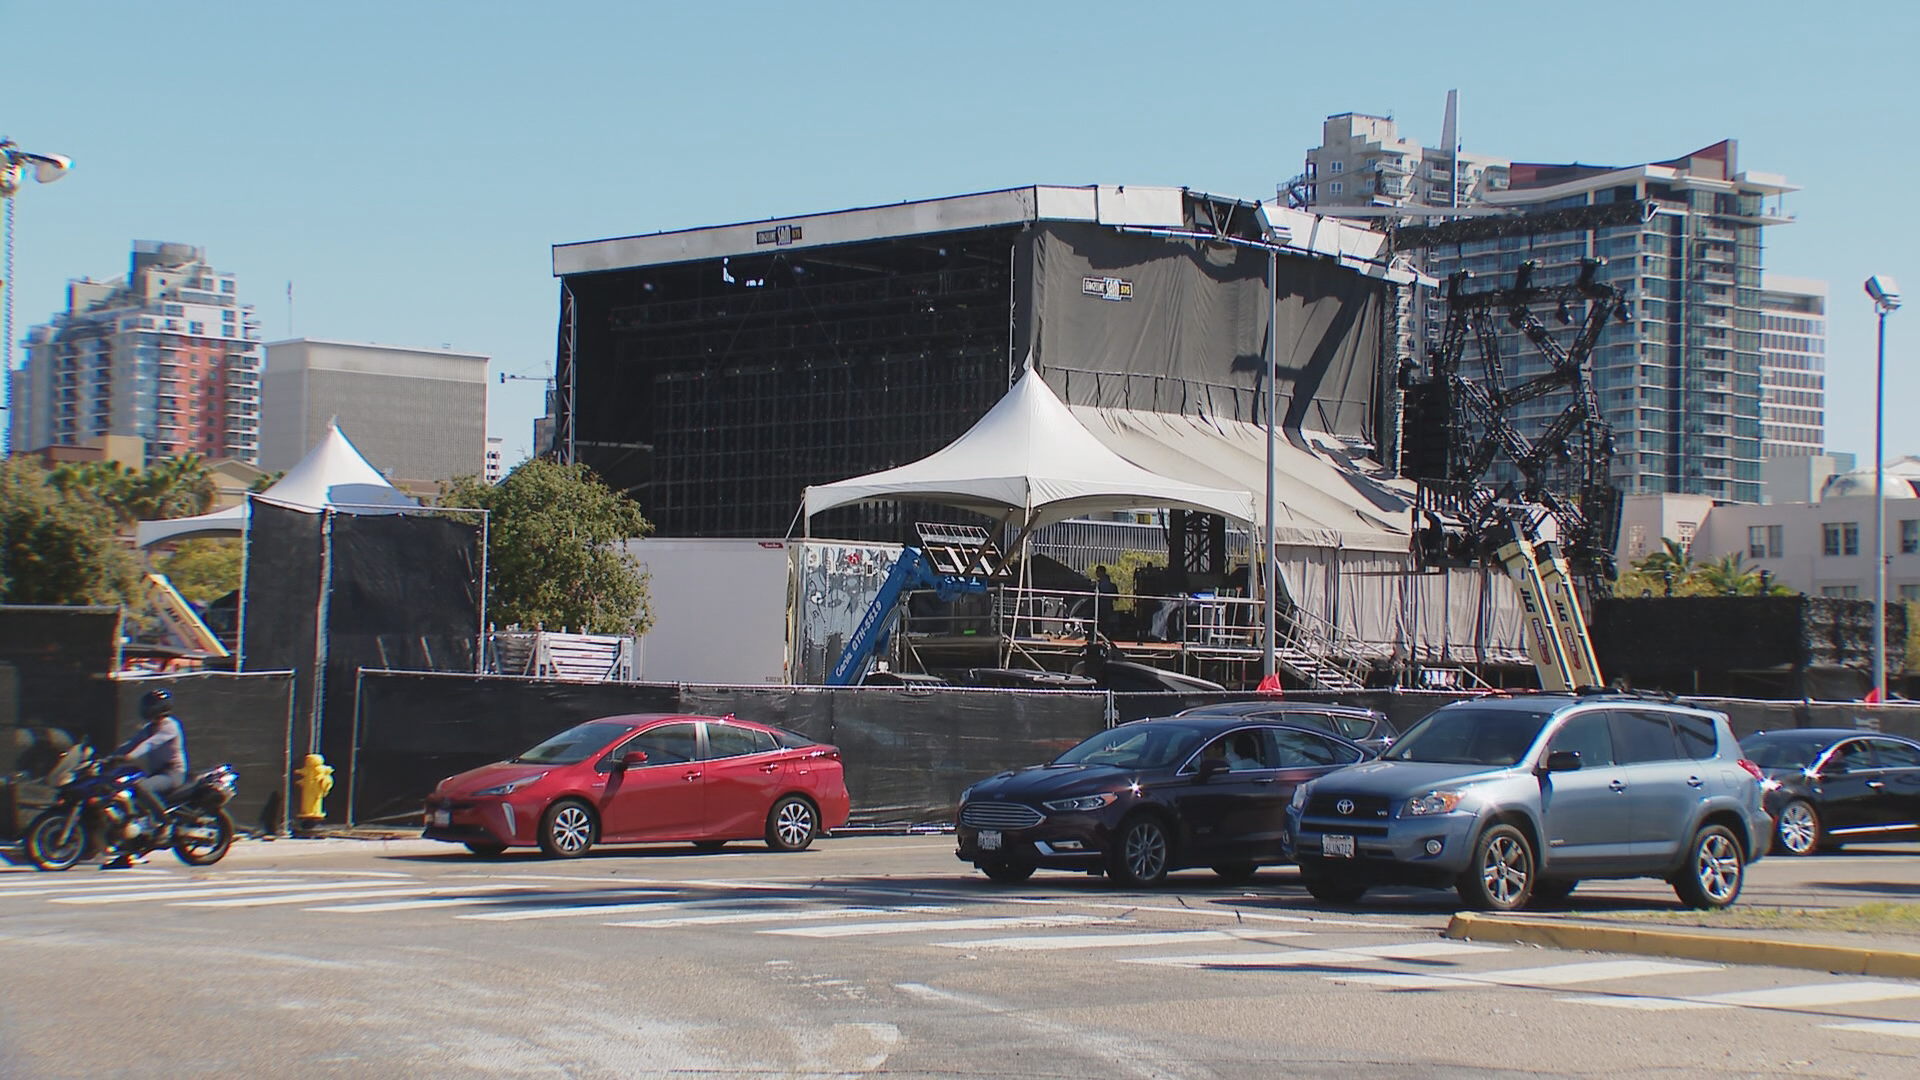 The 'CRSSD' music festival at Waterfront Park will go on as planned even after bigger festivals like SXSW are canceled.